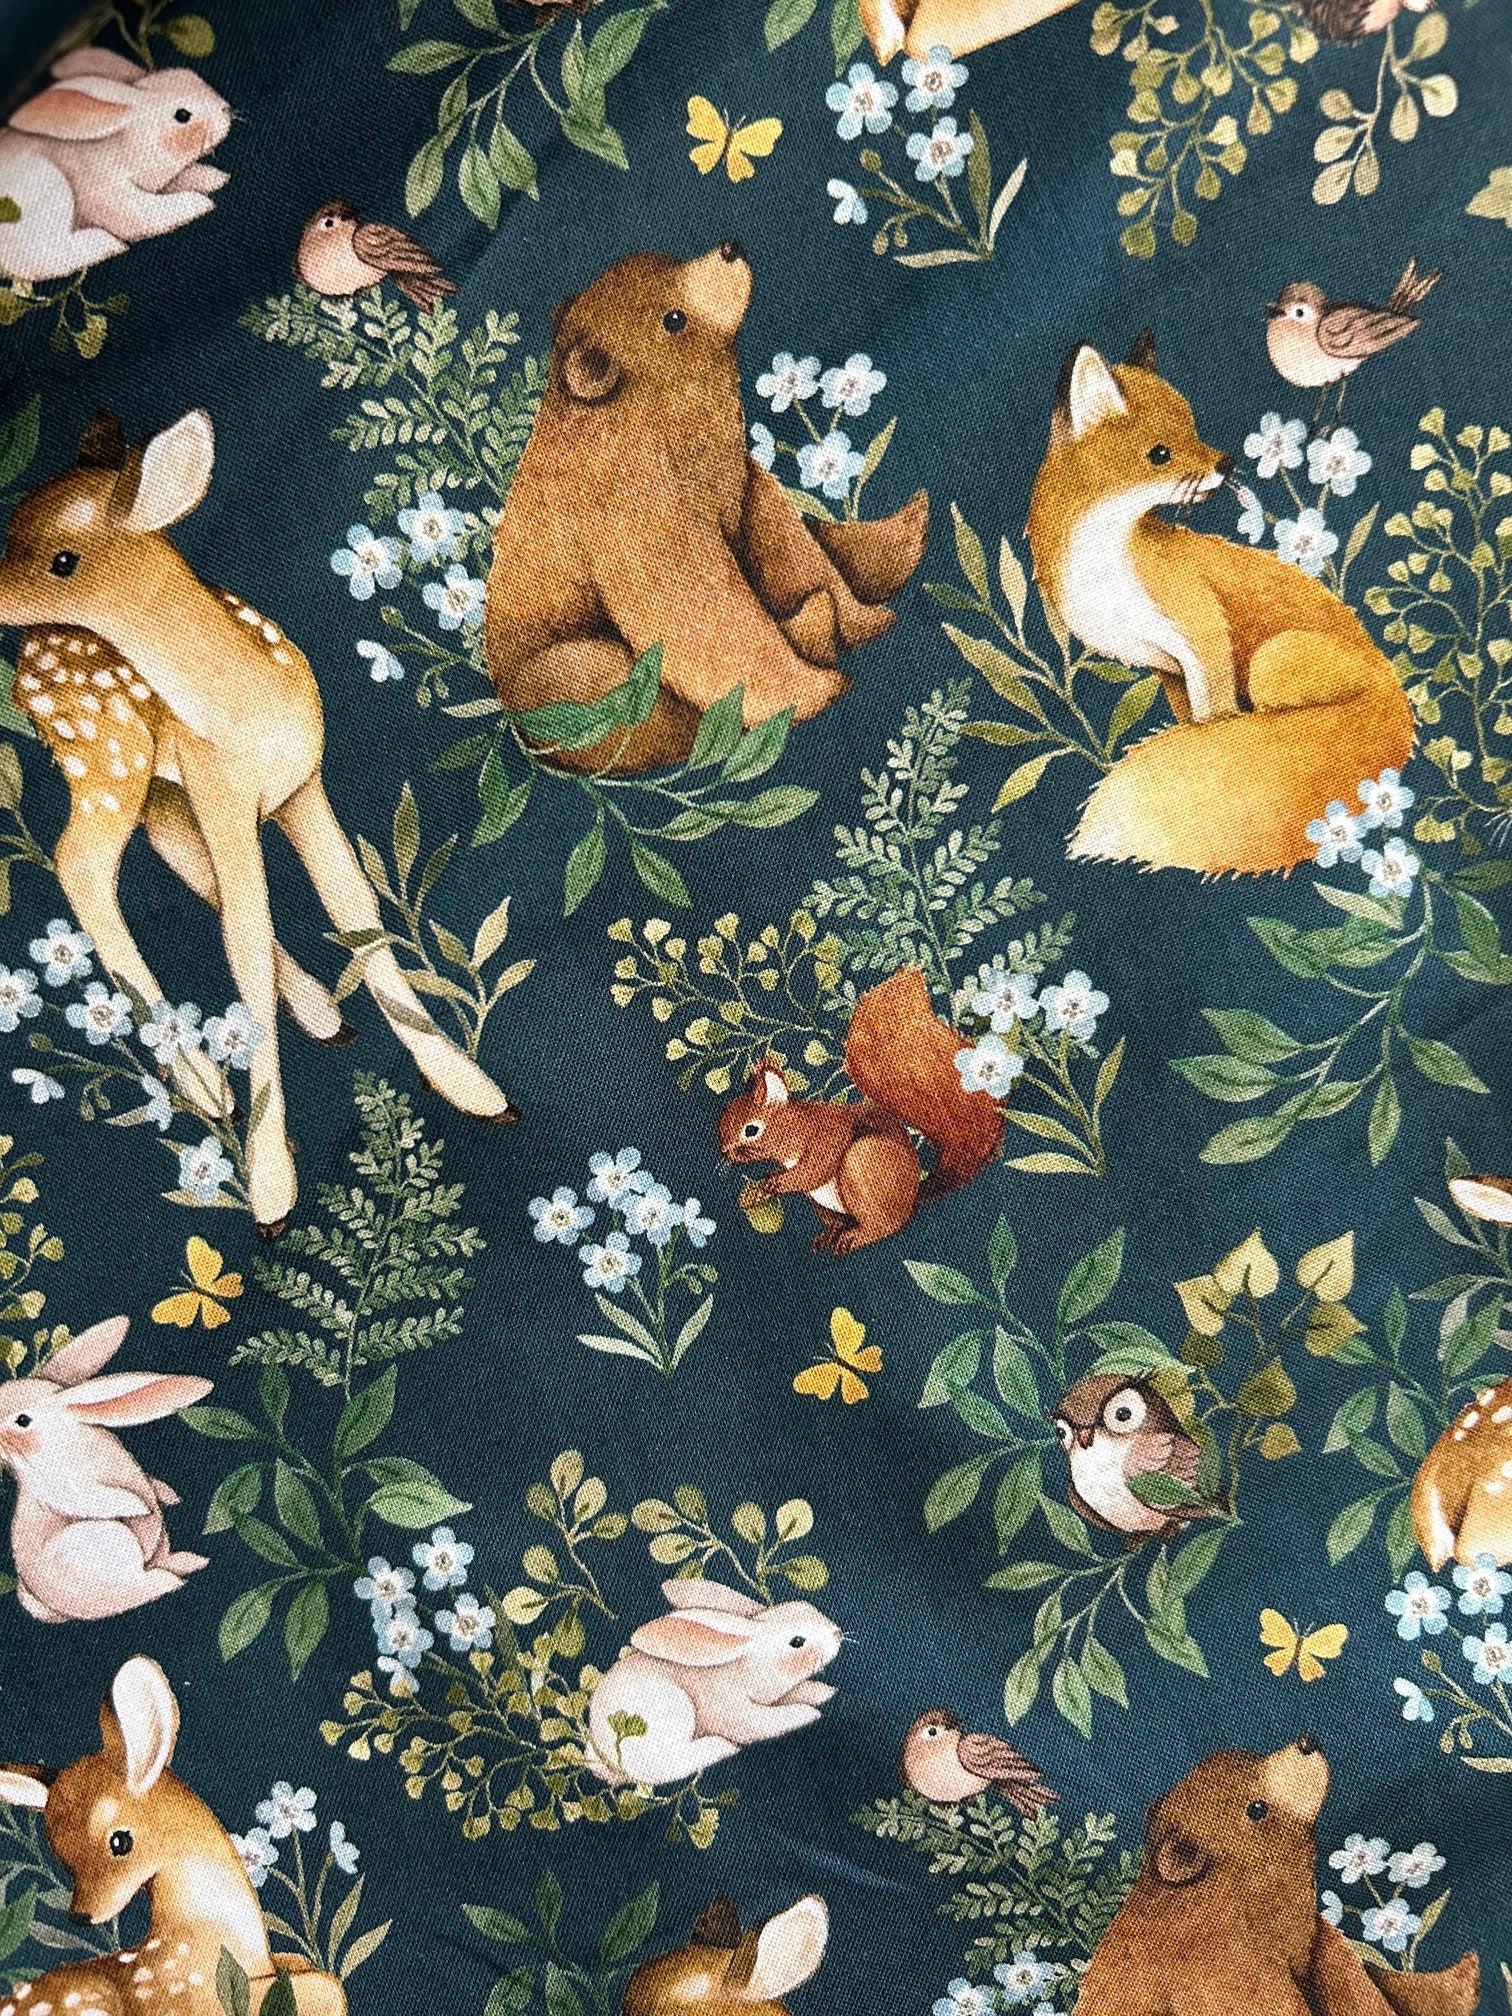 close up of the animals and leaves on green background of the woodsy print